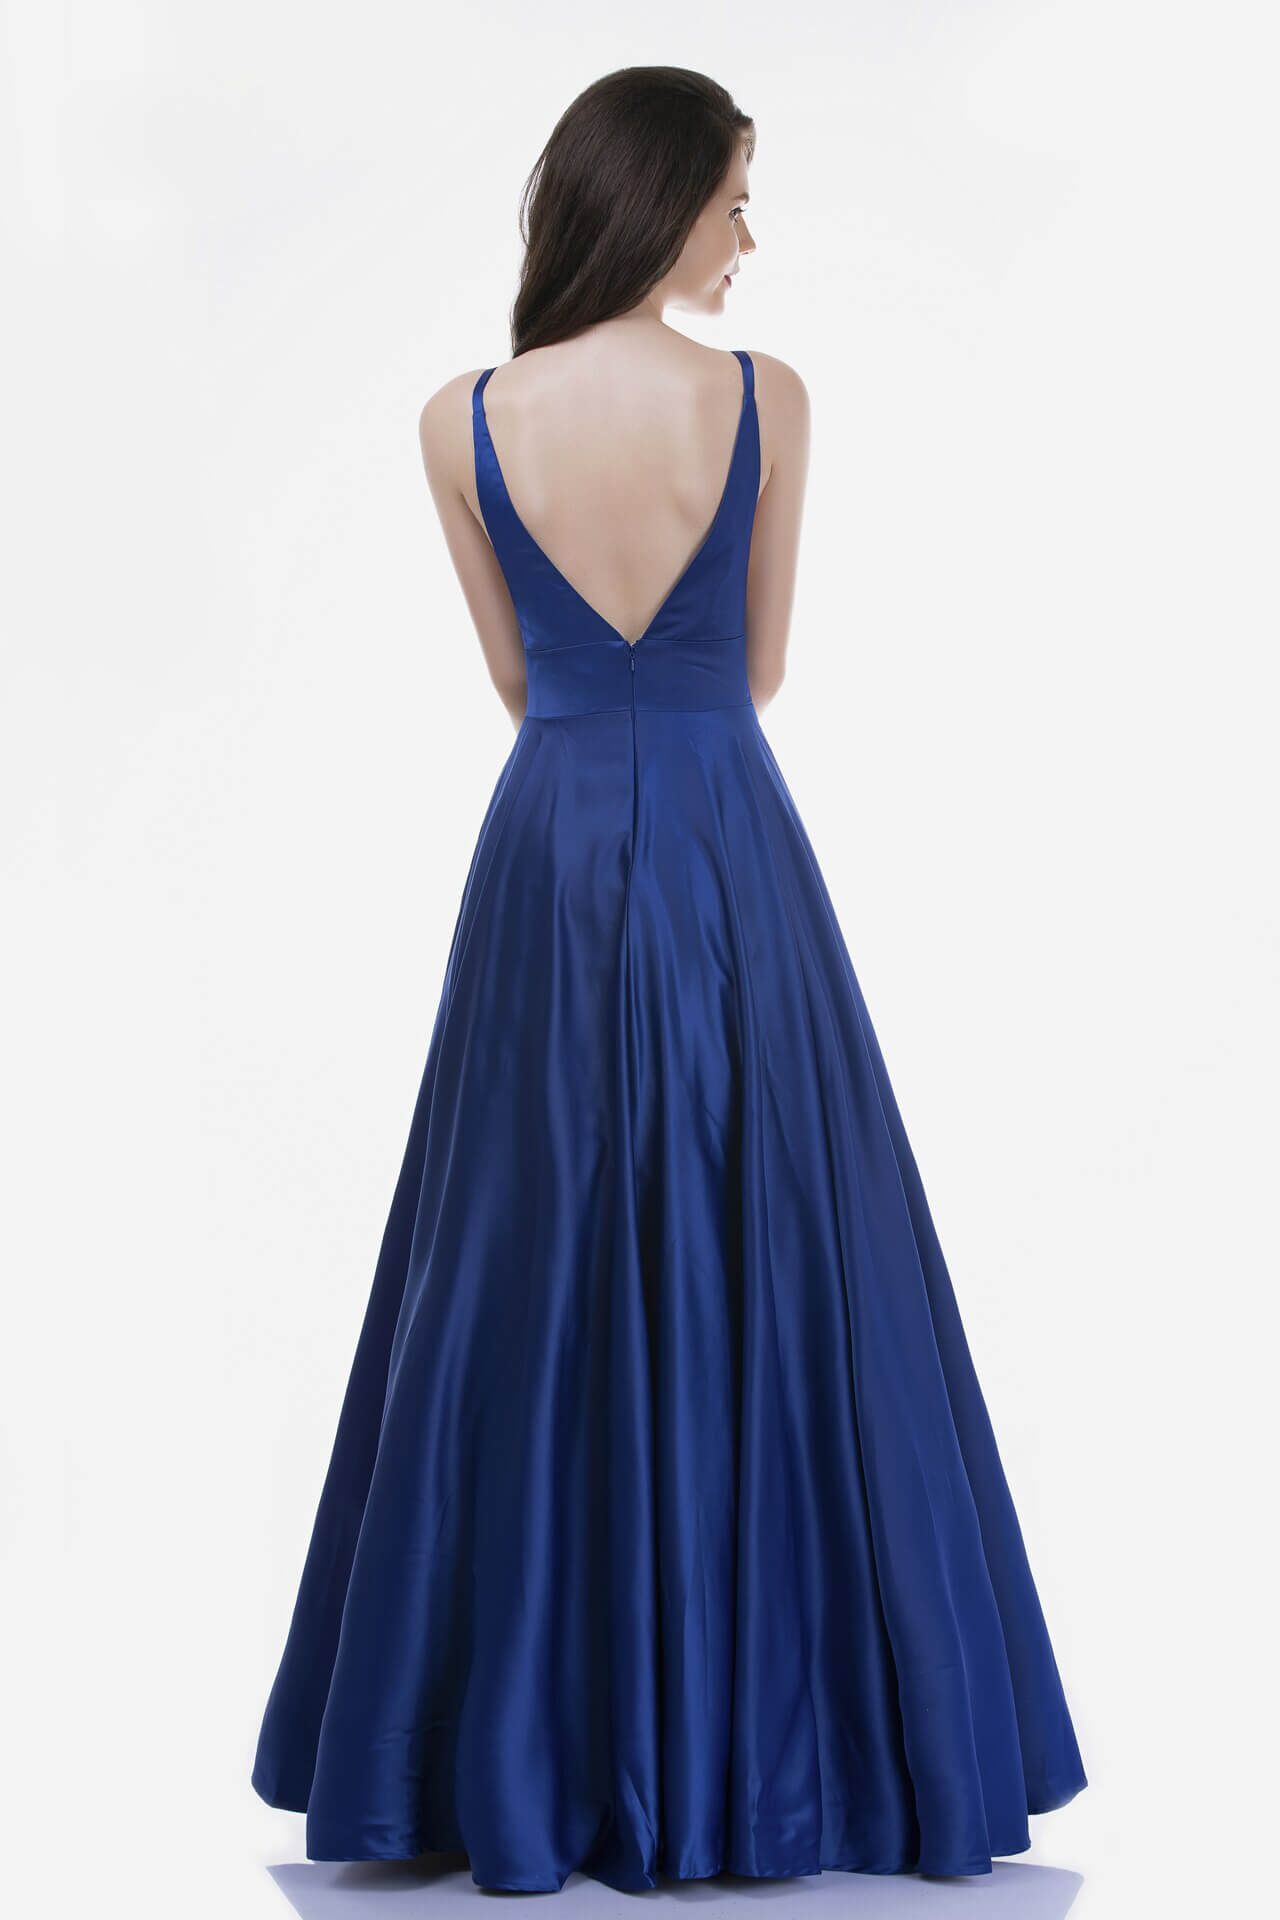 Style 6544 Nina Canacci Size 4 Prom Plunge Navy Blue A-line Dress on Queenly